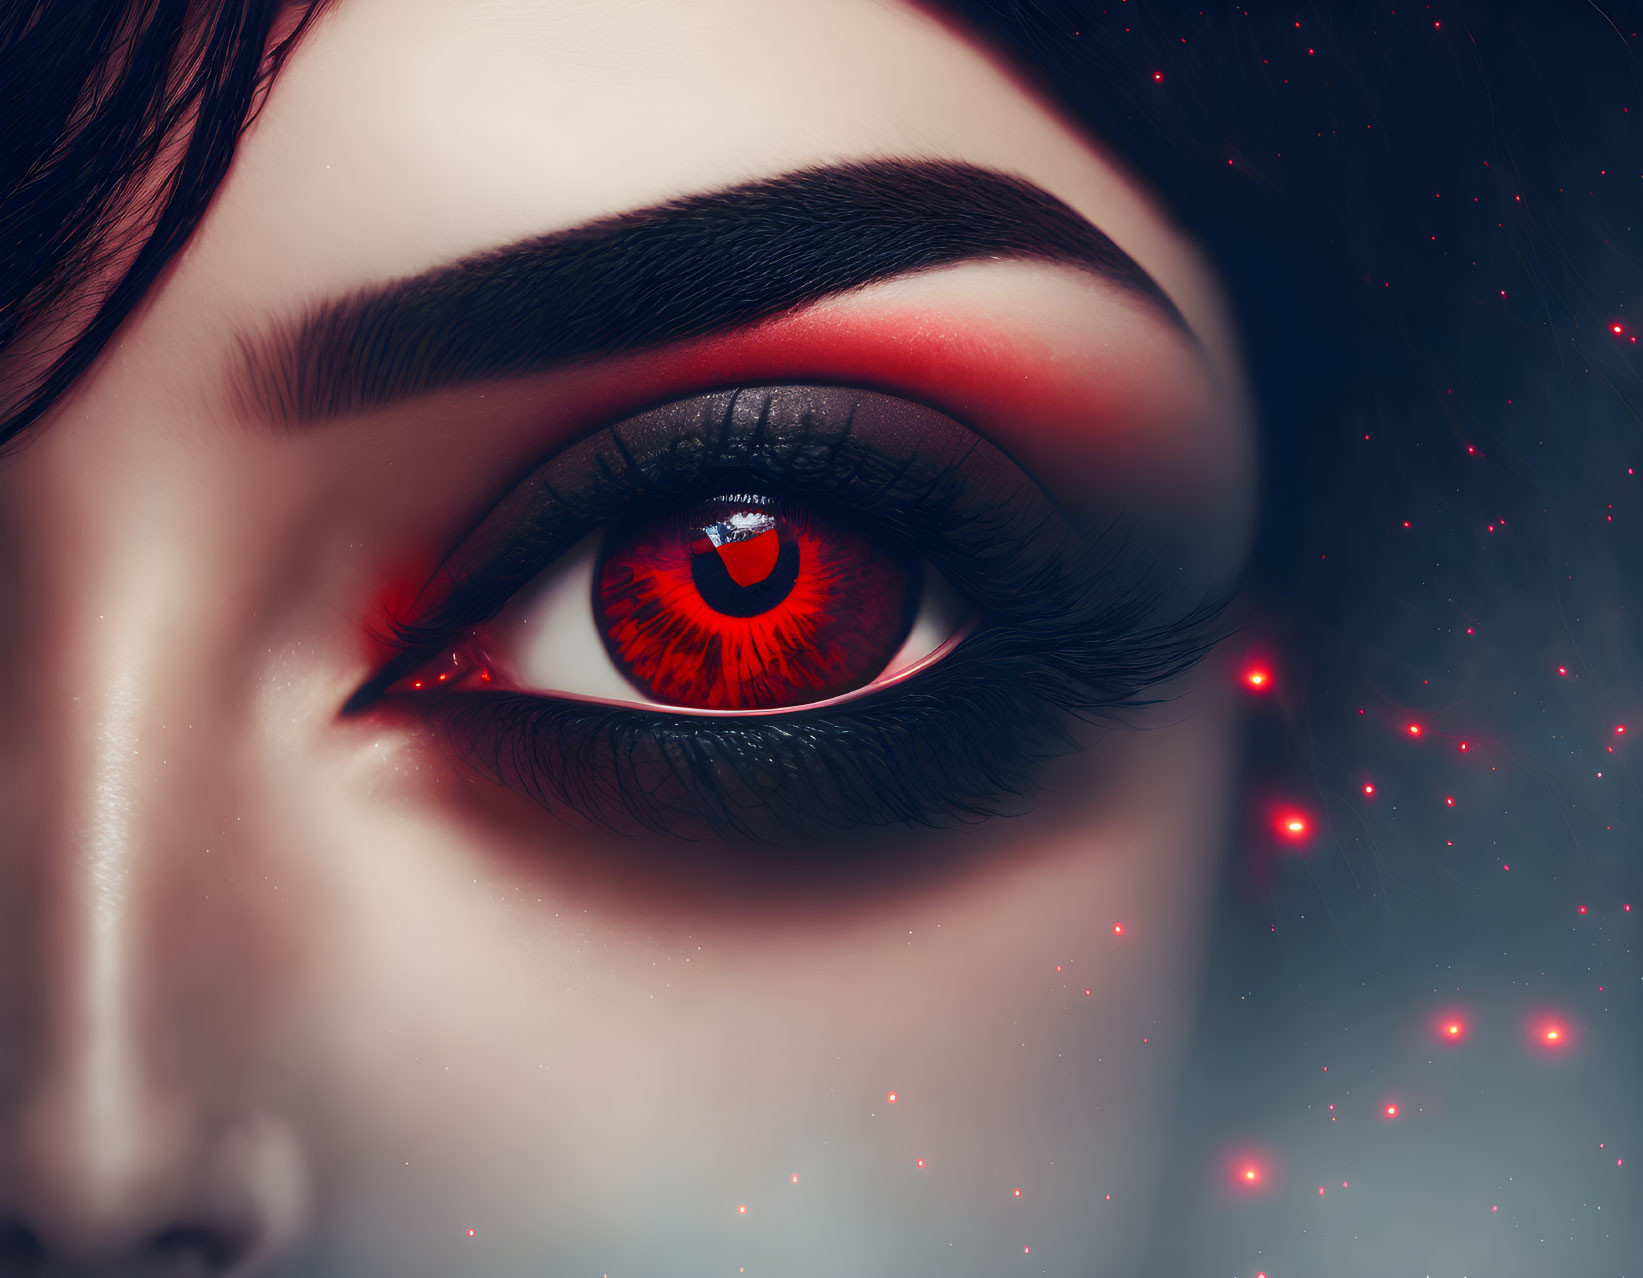 Detailed close-up of person's eye with red makeup and iris, shimmering red particles on dark backdrop